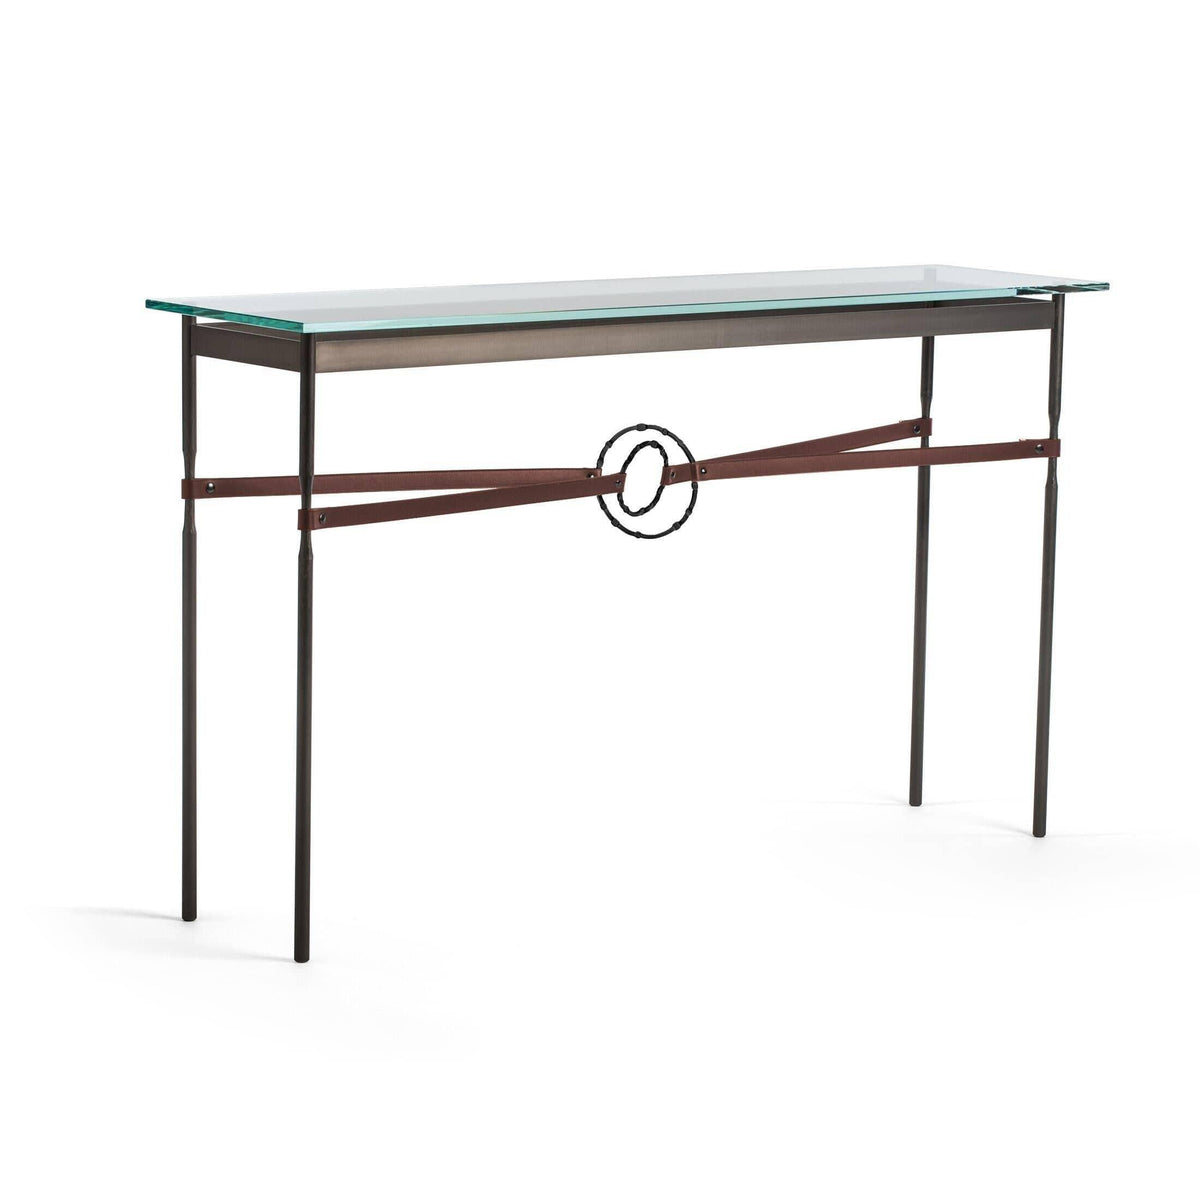 Hubbardton Forge - Equus Brown Leather Console Table - 750118-07-10-LB-VA0714 | Montreal Lighting & Hardware